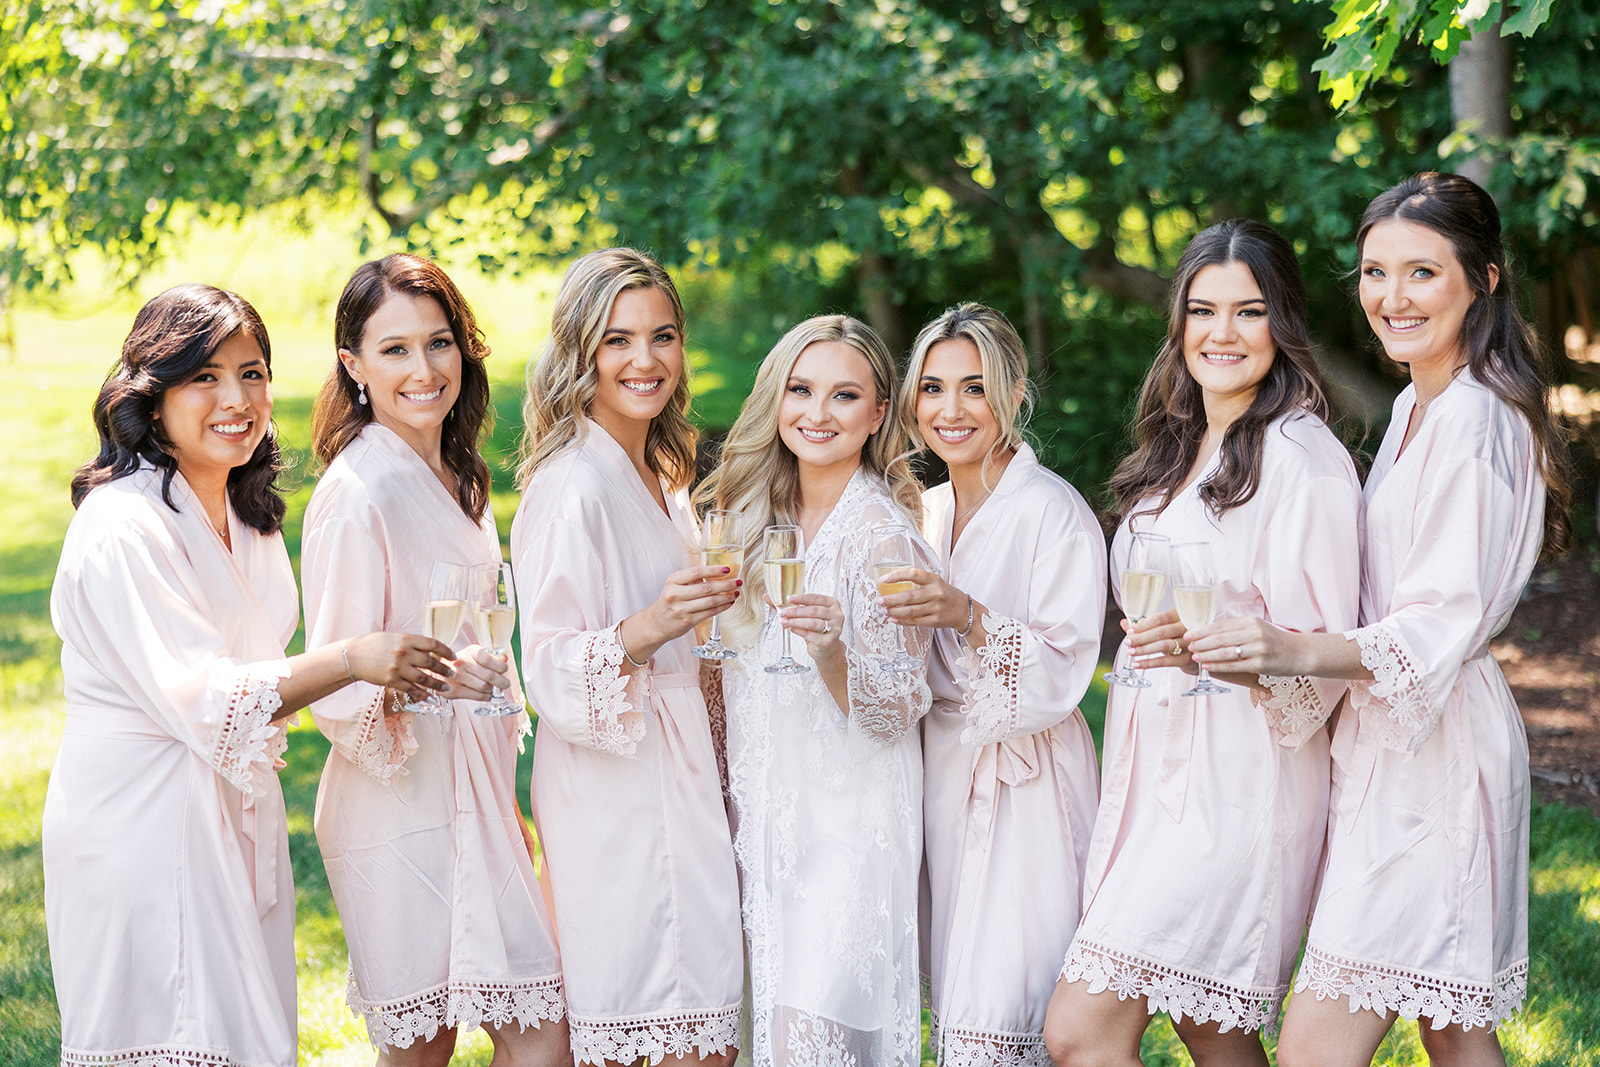 A bride in white pajamas cheers champagne with her bridesmaids in pink pajamas